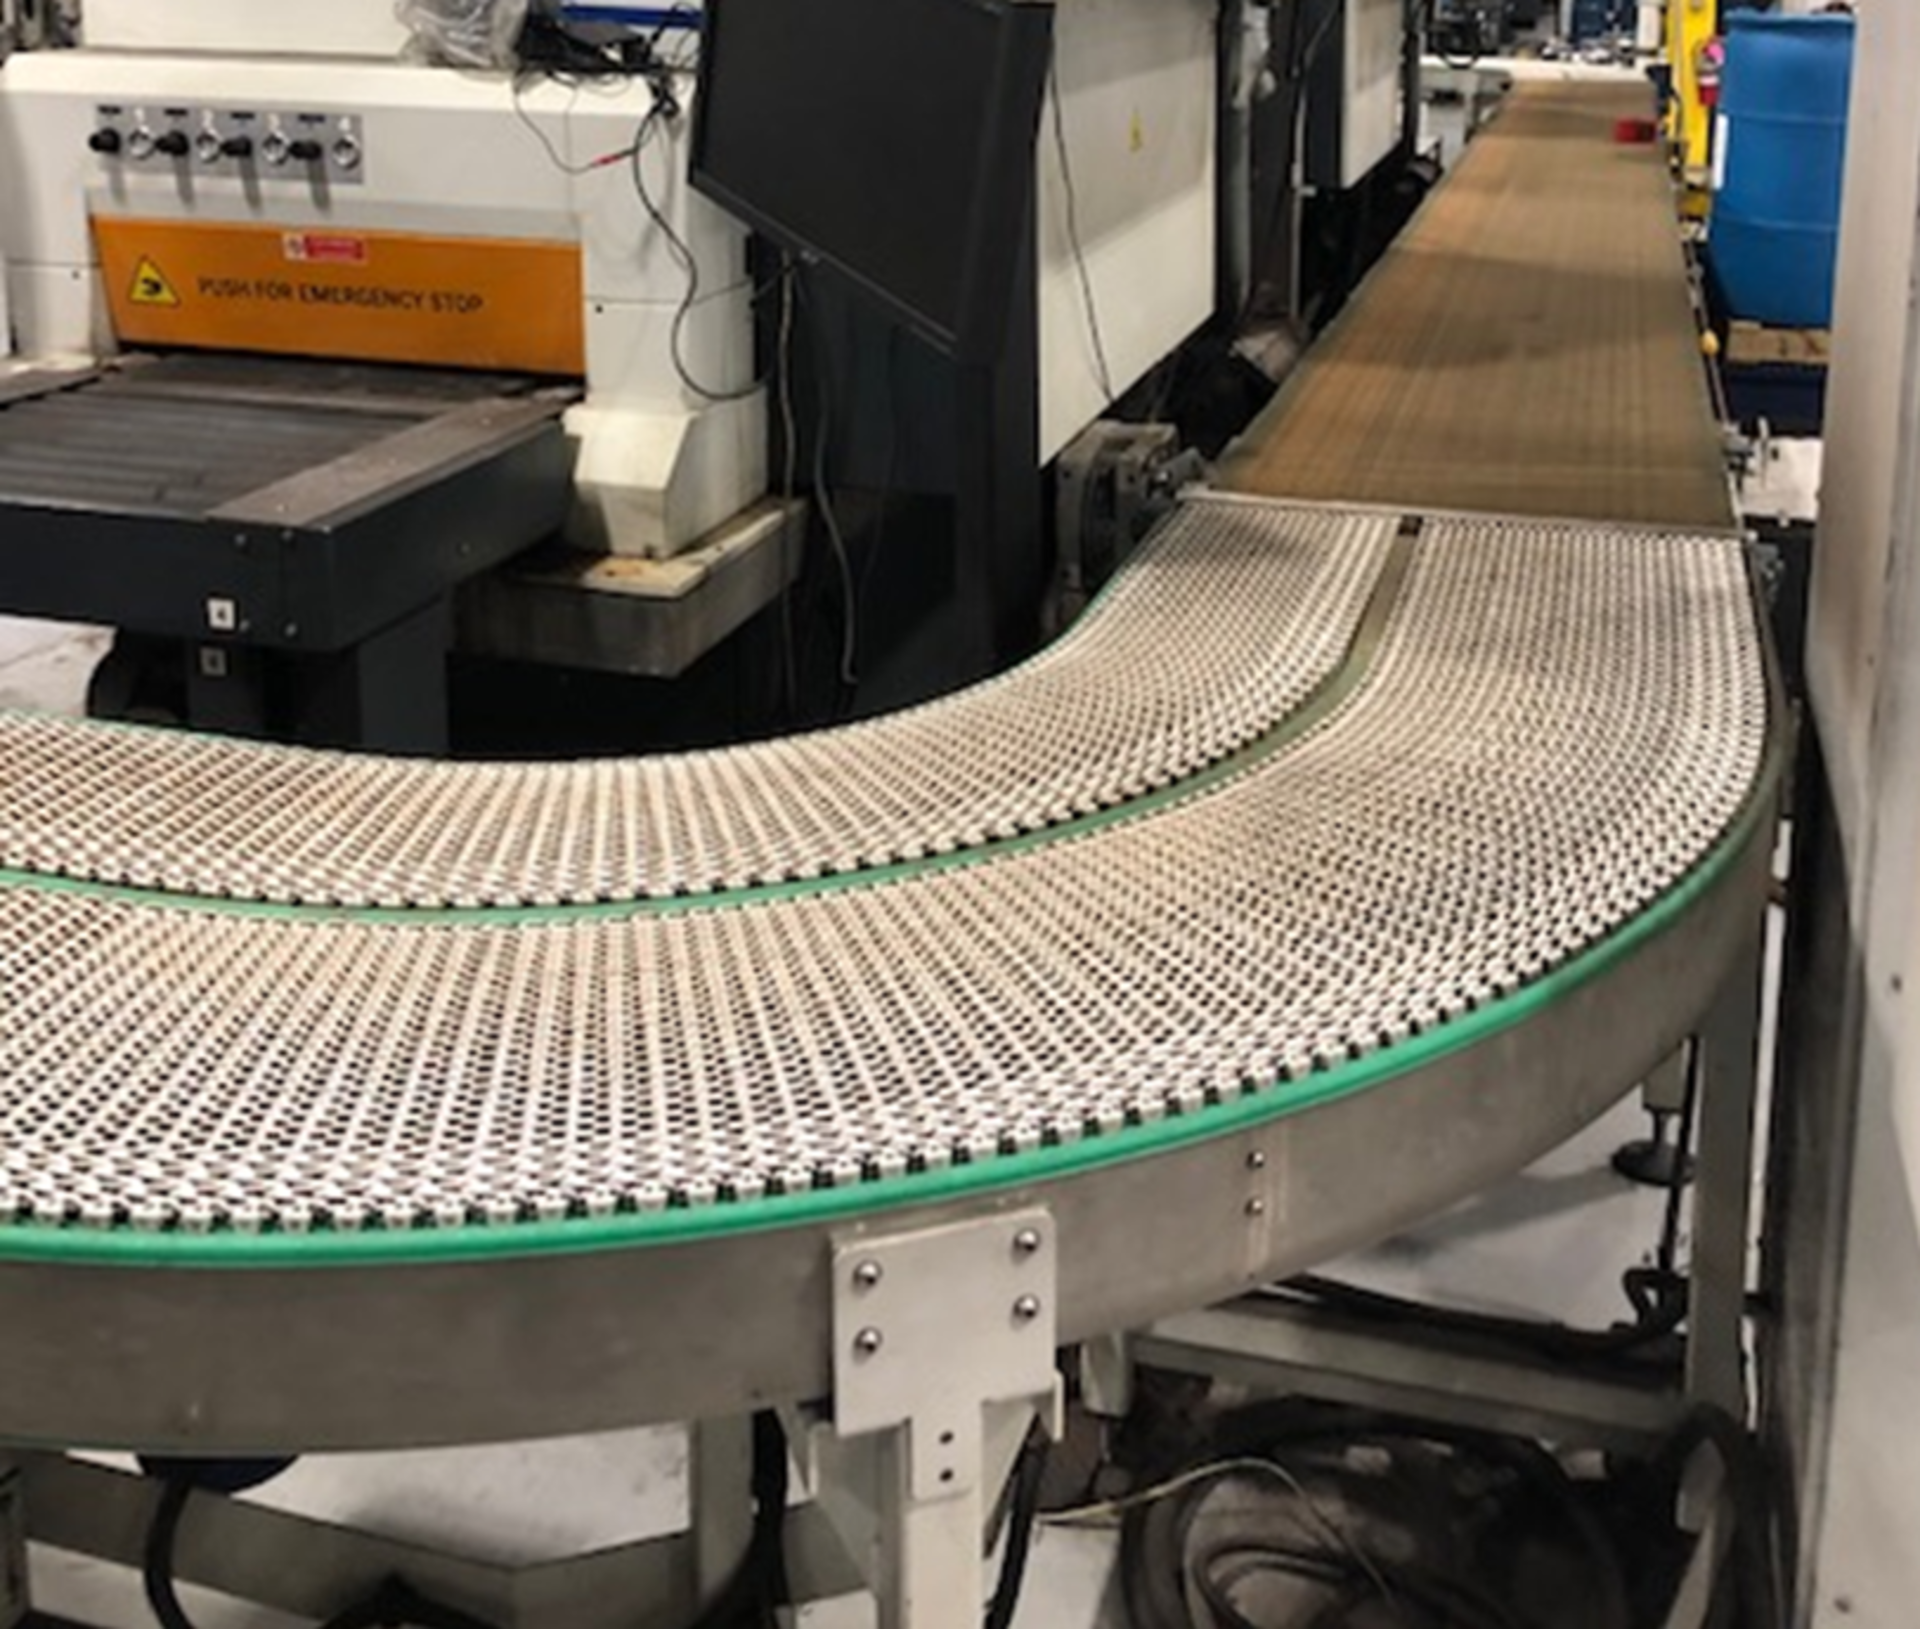 SACOT BELT CONVEYOR, APPROX. 24" WIDE X 26' LONG WITH (2) BENDS **RIGGING FEE DUE TO SHOEMAKER $